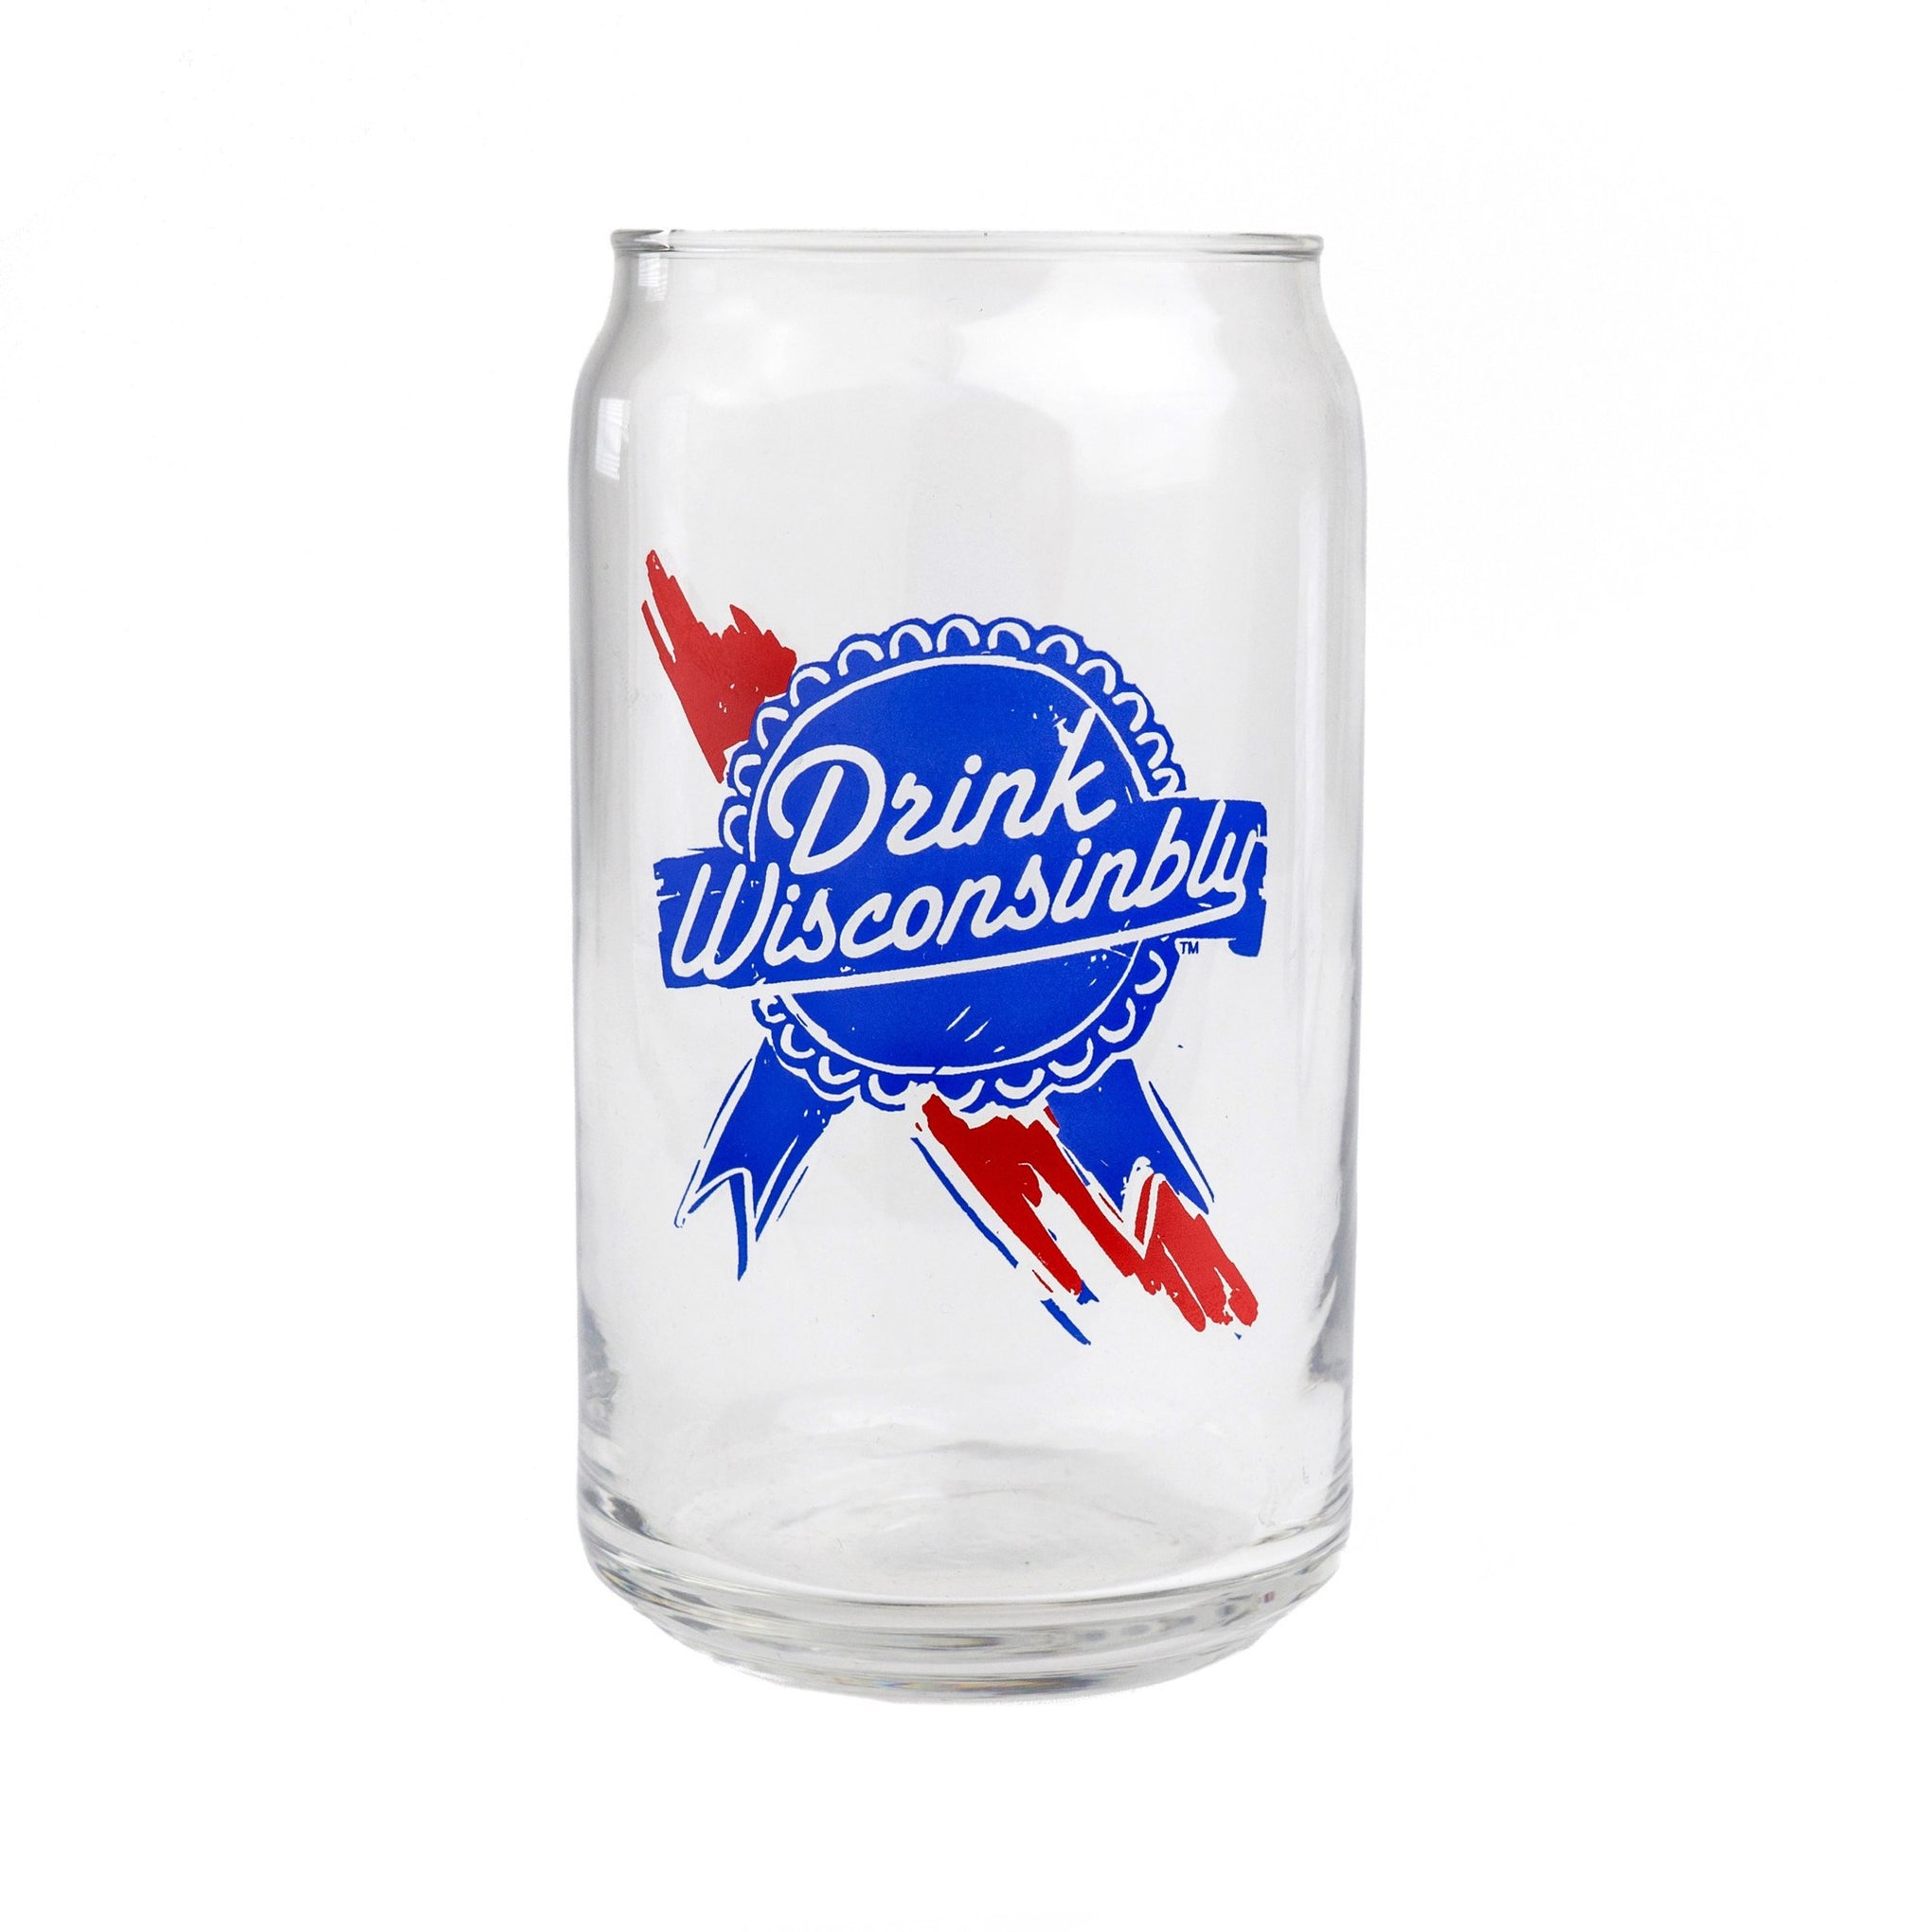 Pint Glasses - Drink Wisconsinbly